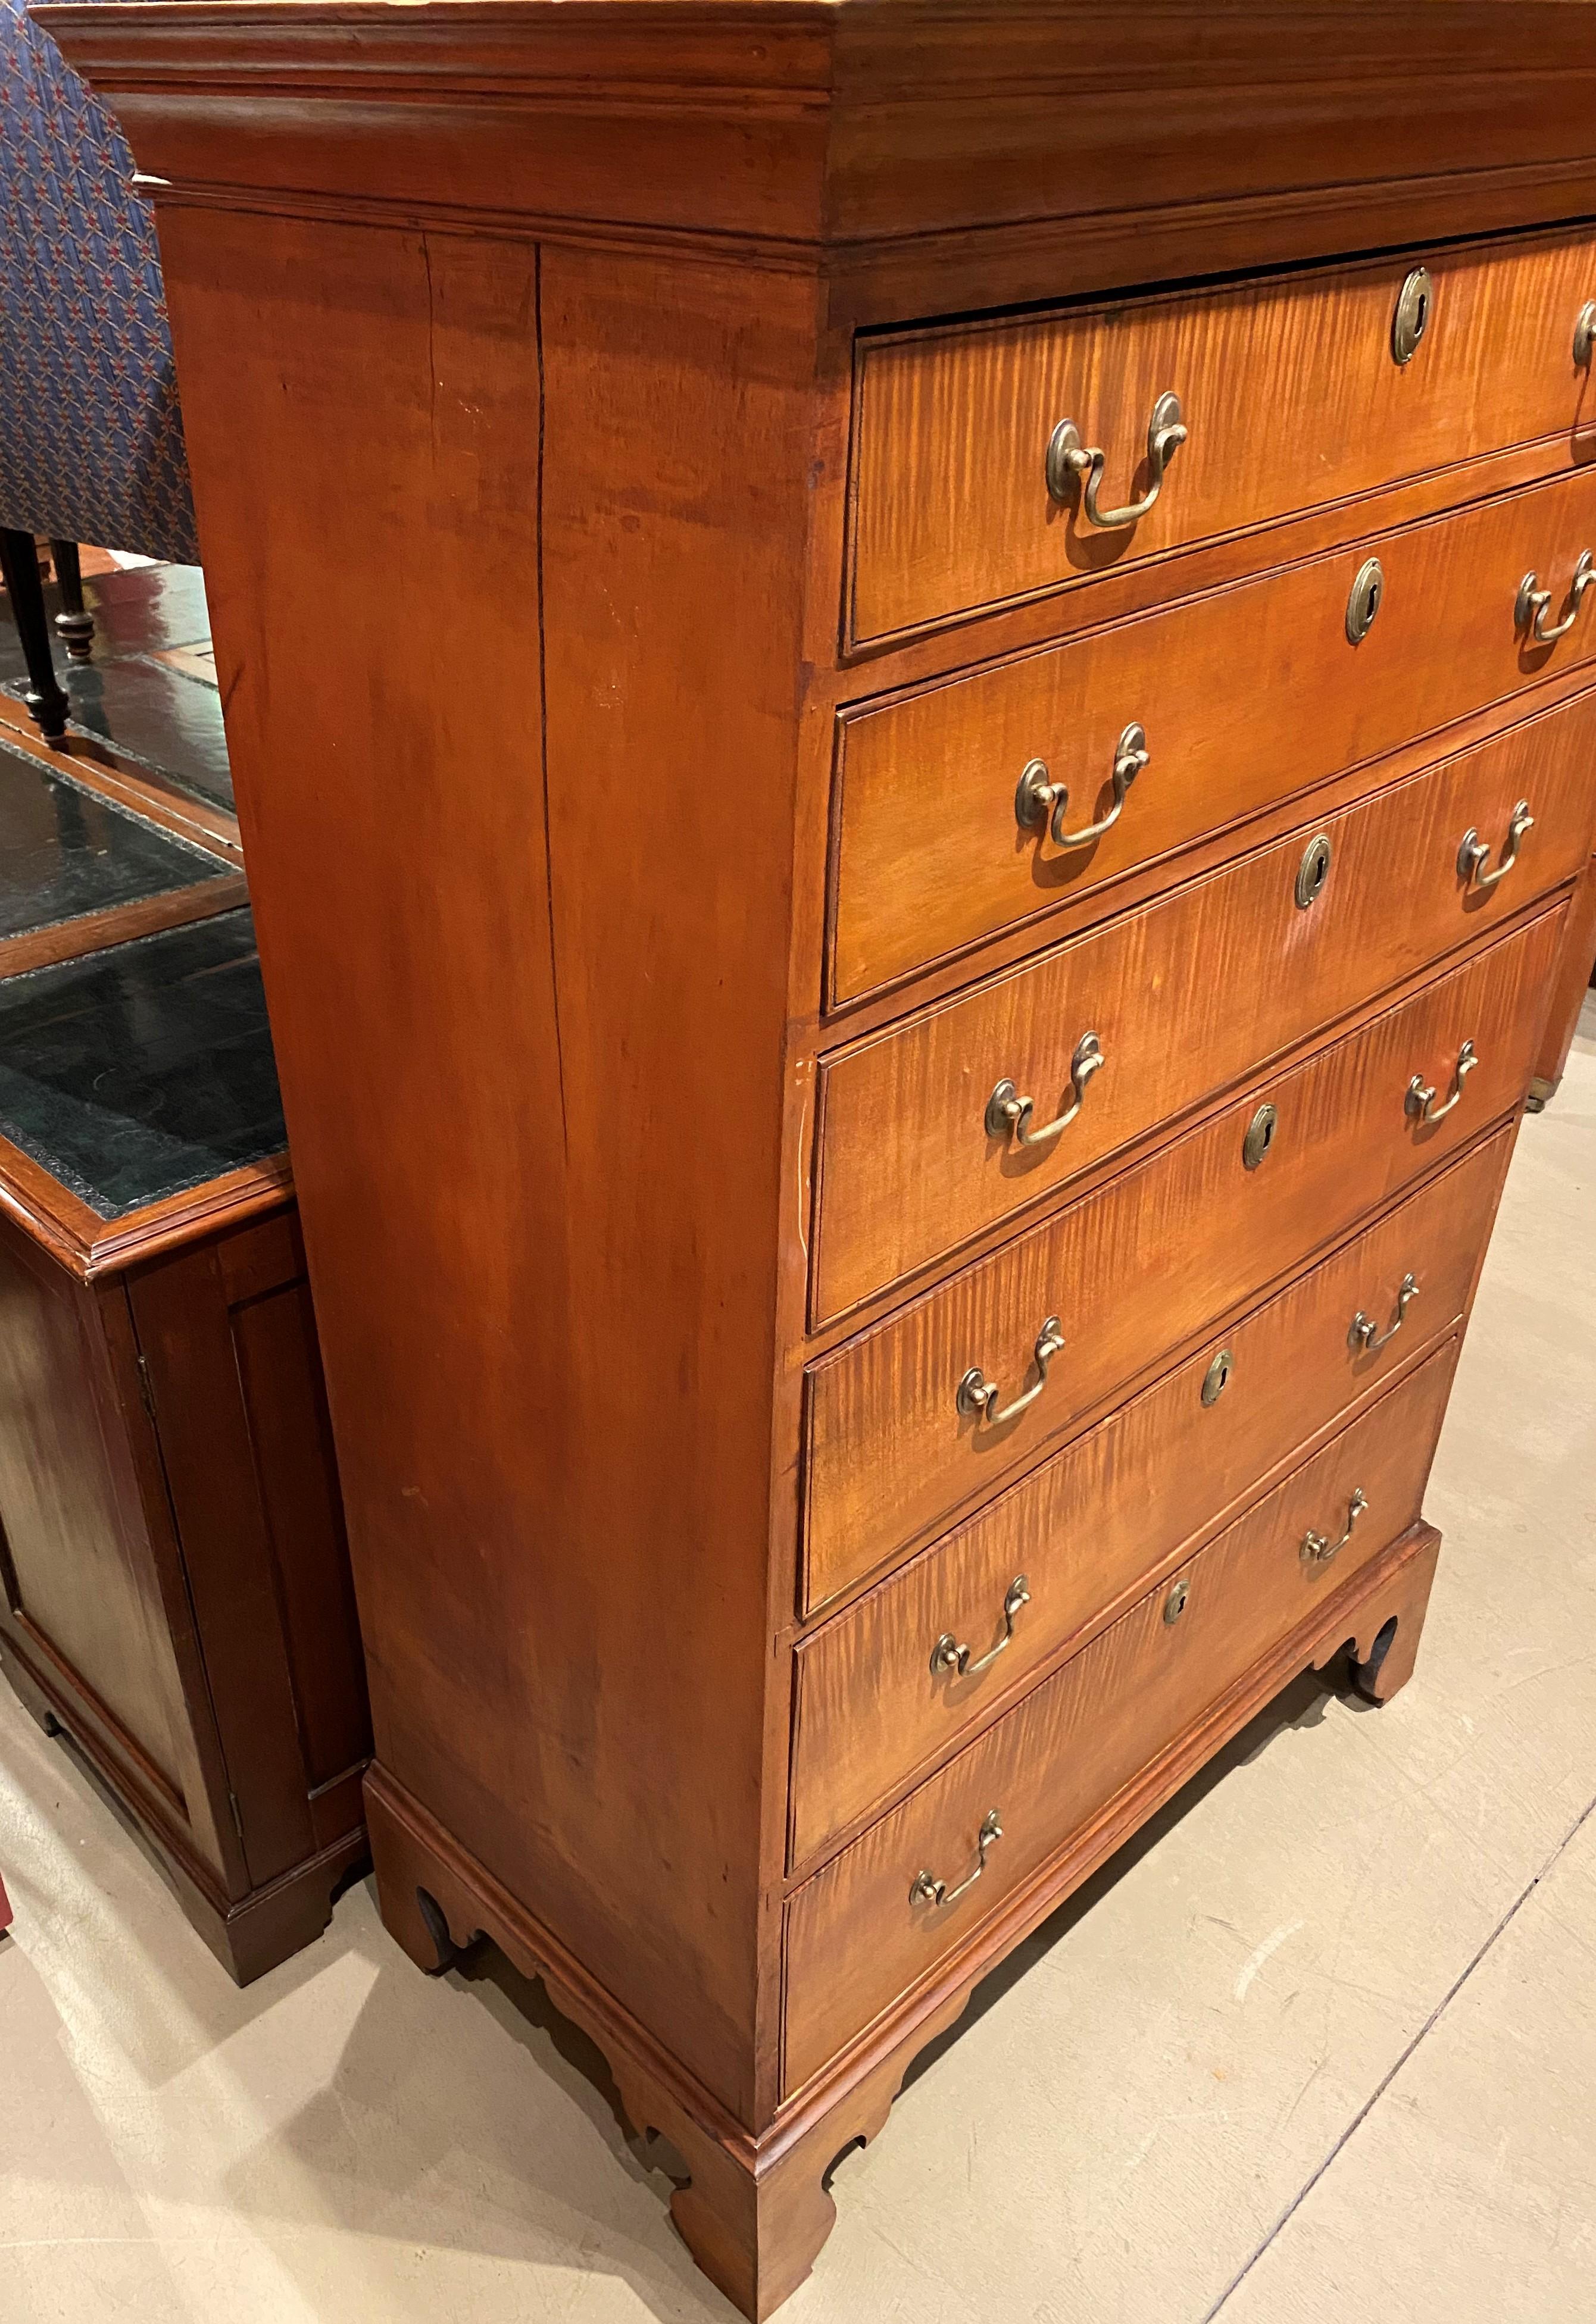 Chippendale New Hampshire Tiger Maple Six Drawer Tall Chest circa 1780